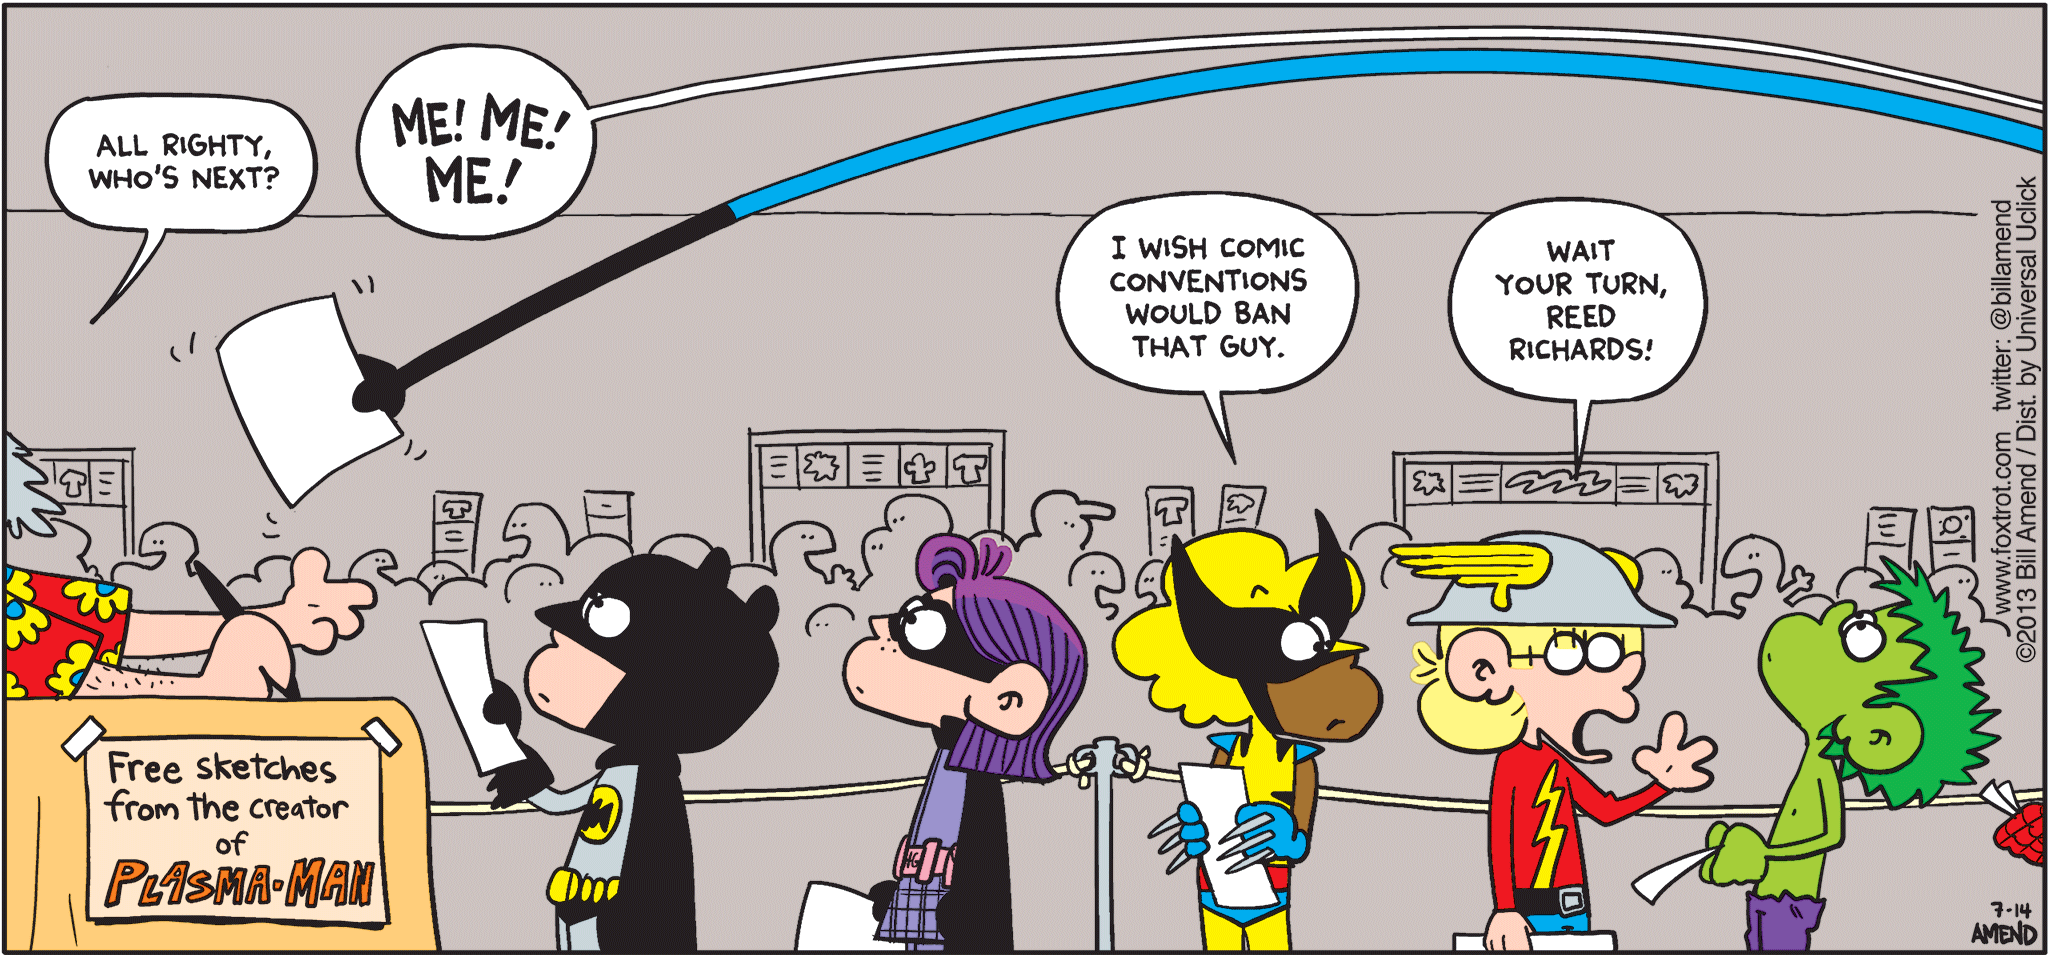 FoxTrot by Bill Amend - "Mr. Not-So-Fantastic" published July 14, 2013 - Man: All righty, who's next? Reed: ME! ME! ME! Marcus: I wish comic conventions would ban that guy. Jason: Wait your turn, Reed Richards!